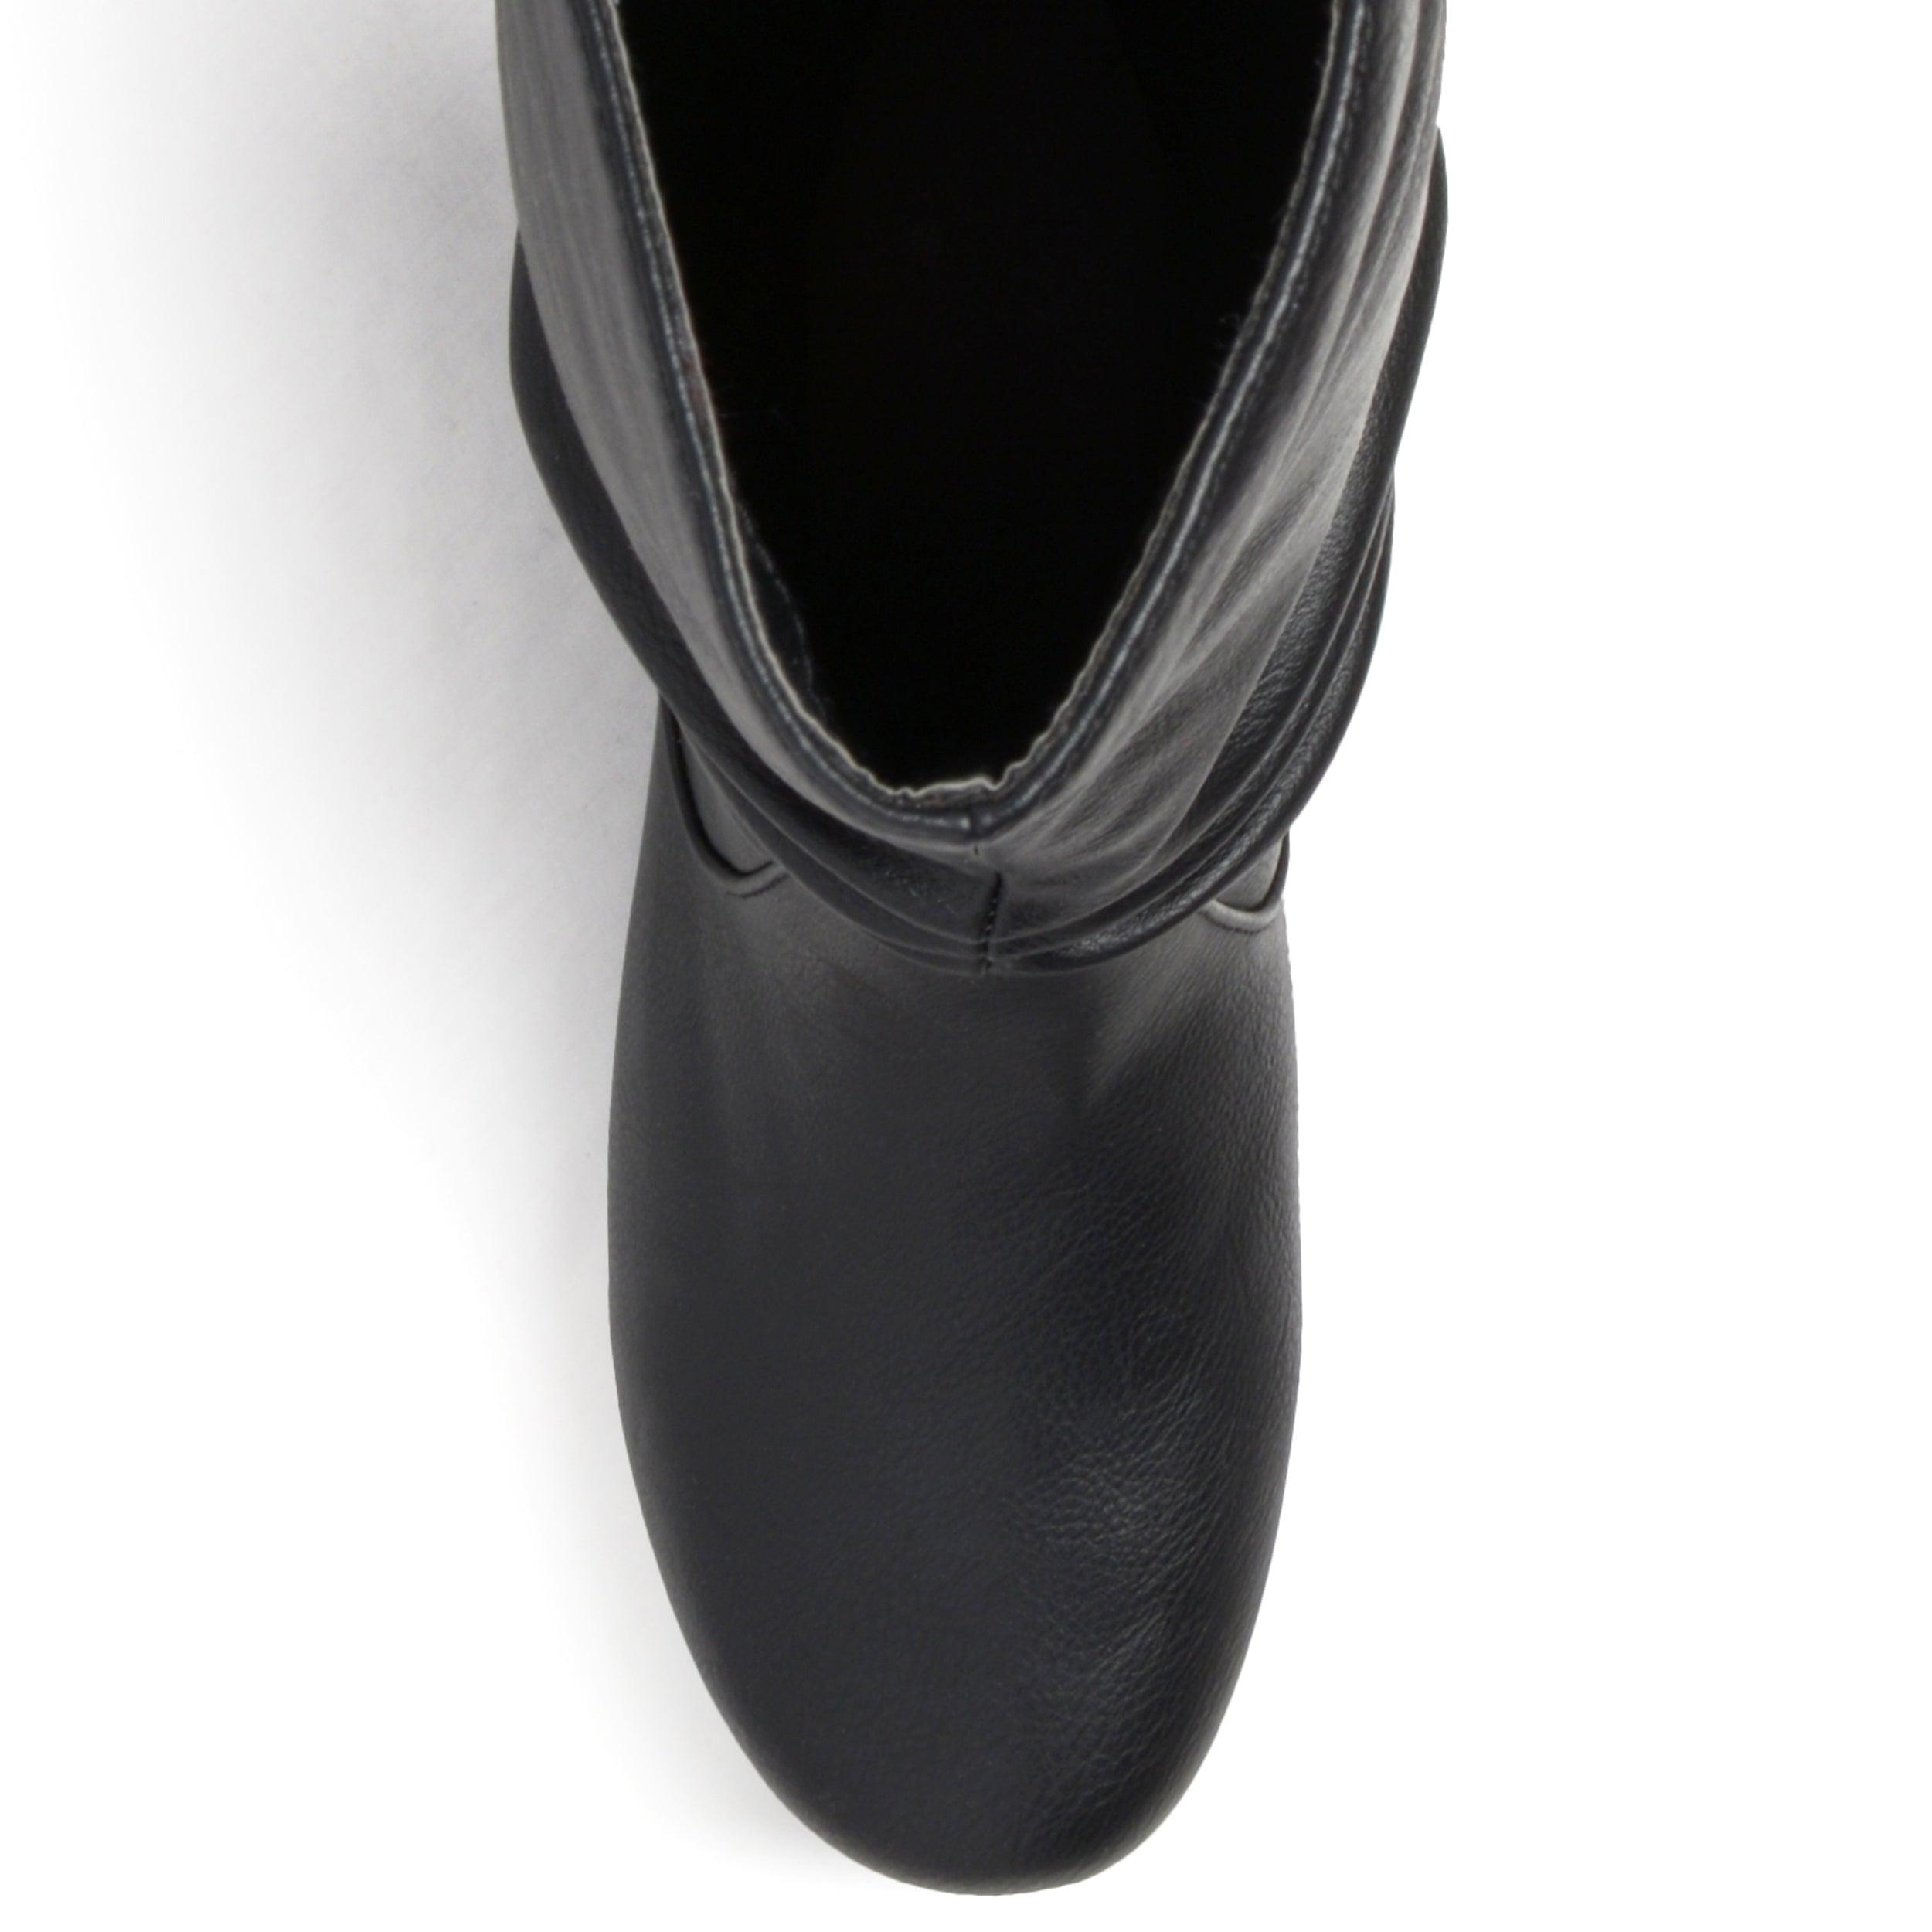 Jayne Booties | Women's Flat Riding Boots | Journee Collection